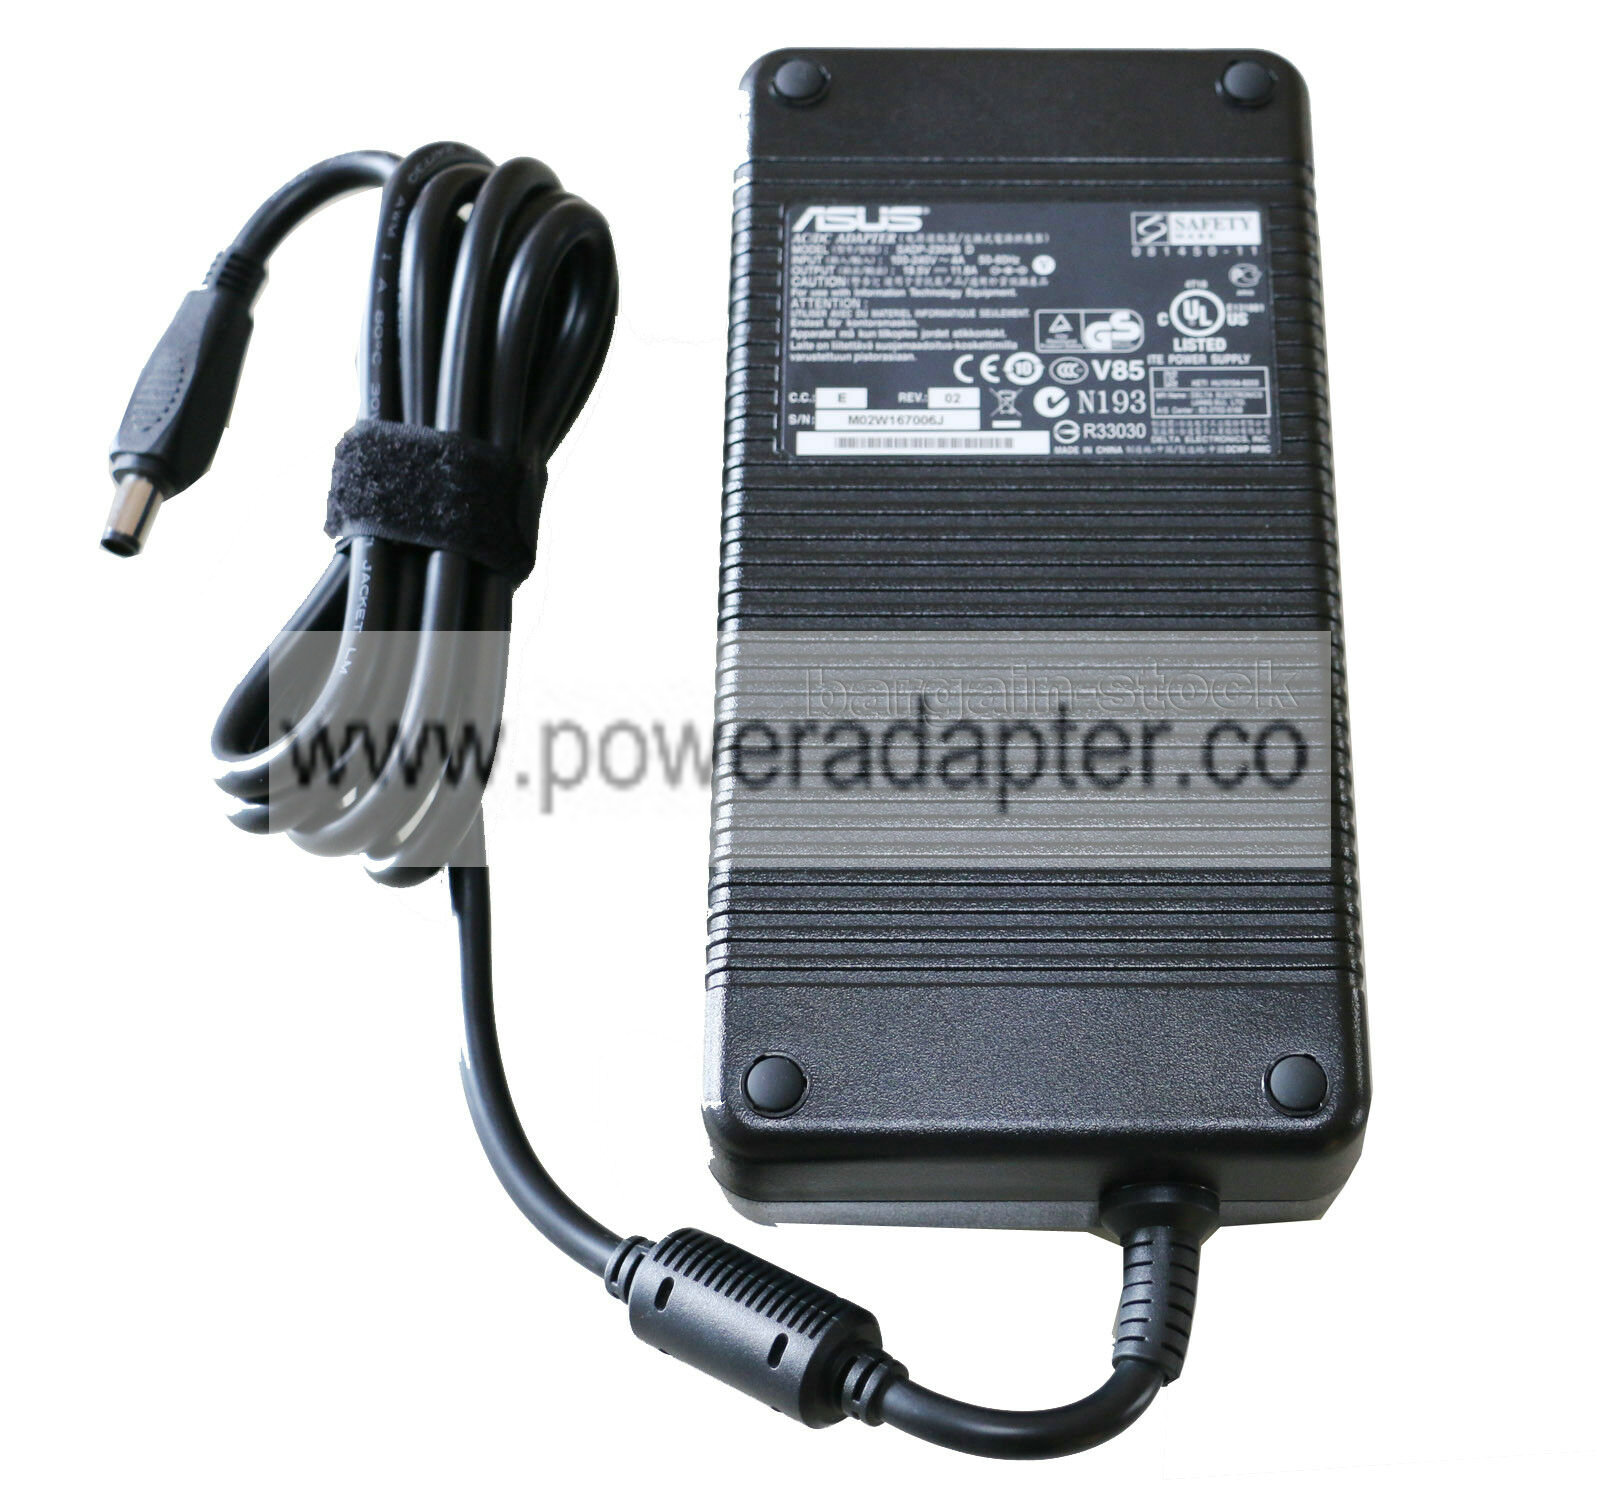 Original ASUS 19.5V 11.8A 230W AC Power Adapter Charger ADP-230AB D ADP-230CB B Compatible Brand: For ASUS Condition